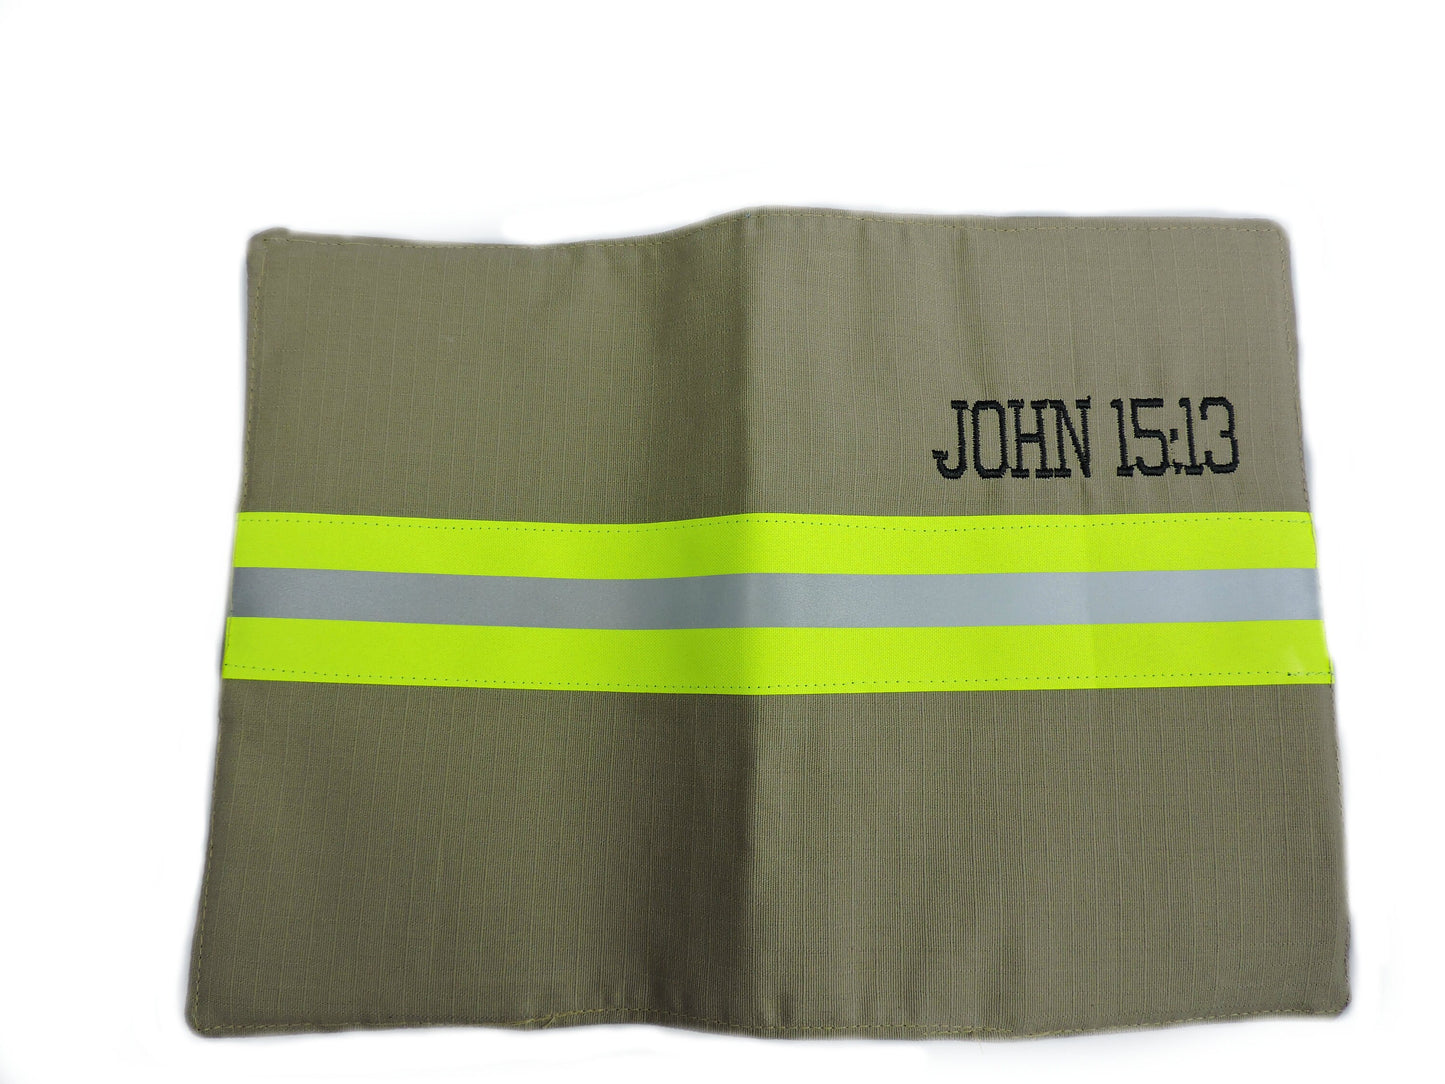 Tan fabric Firefighter bible cover